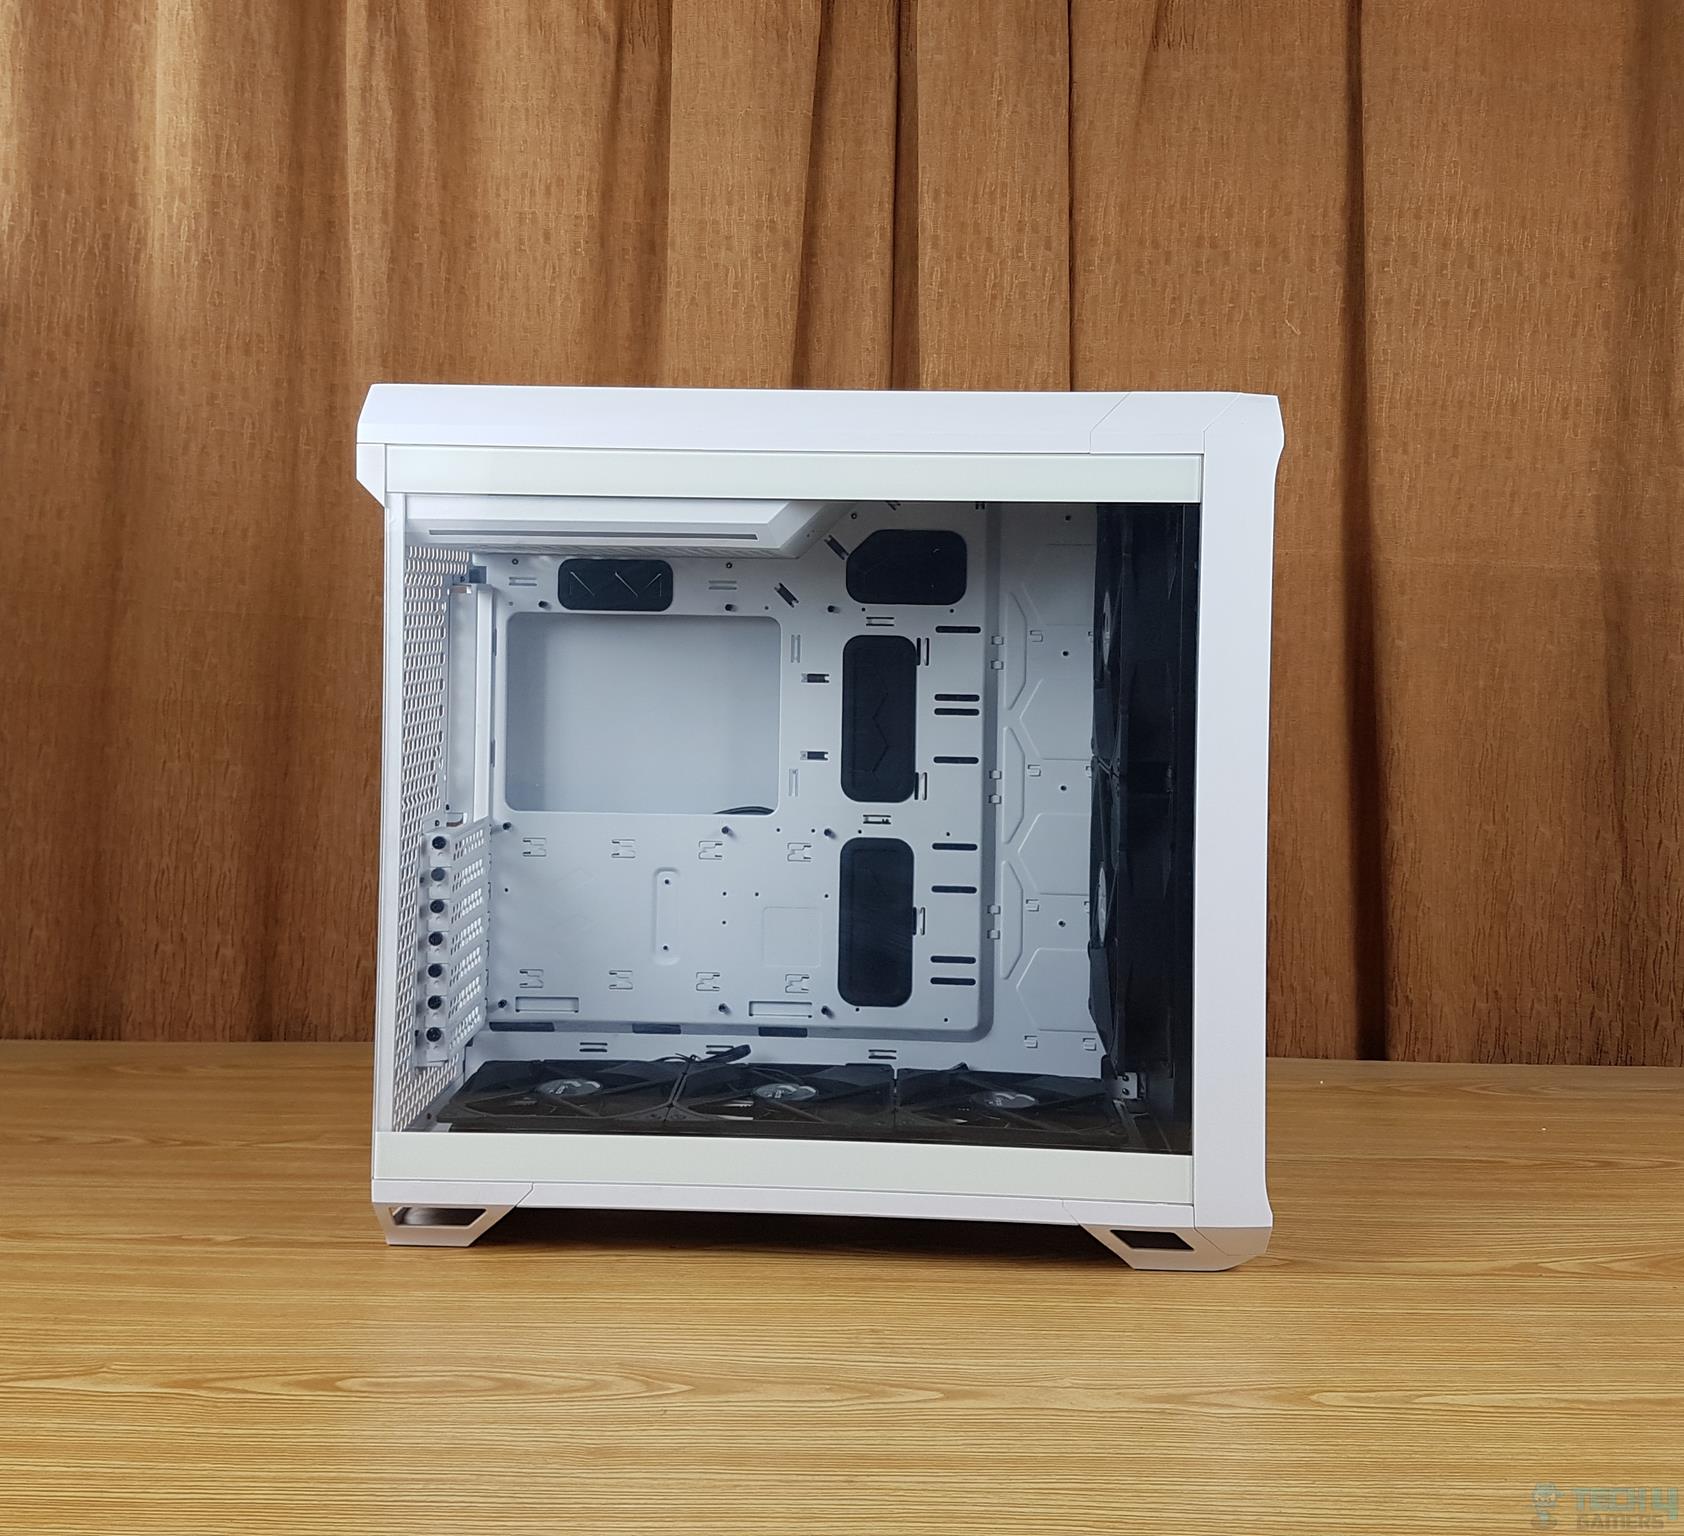 Fractal Design Torrent White TG Clear Tint PC Case — The clear tint tempered glass side panel